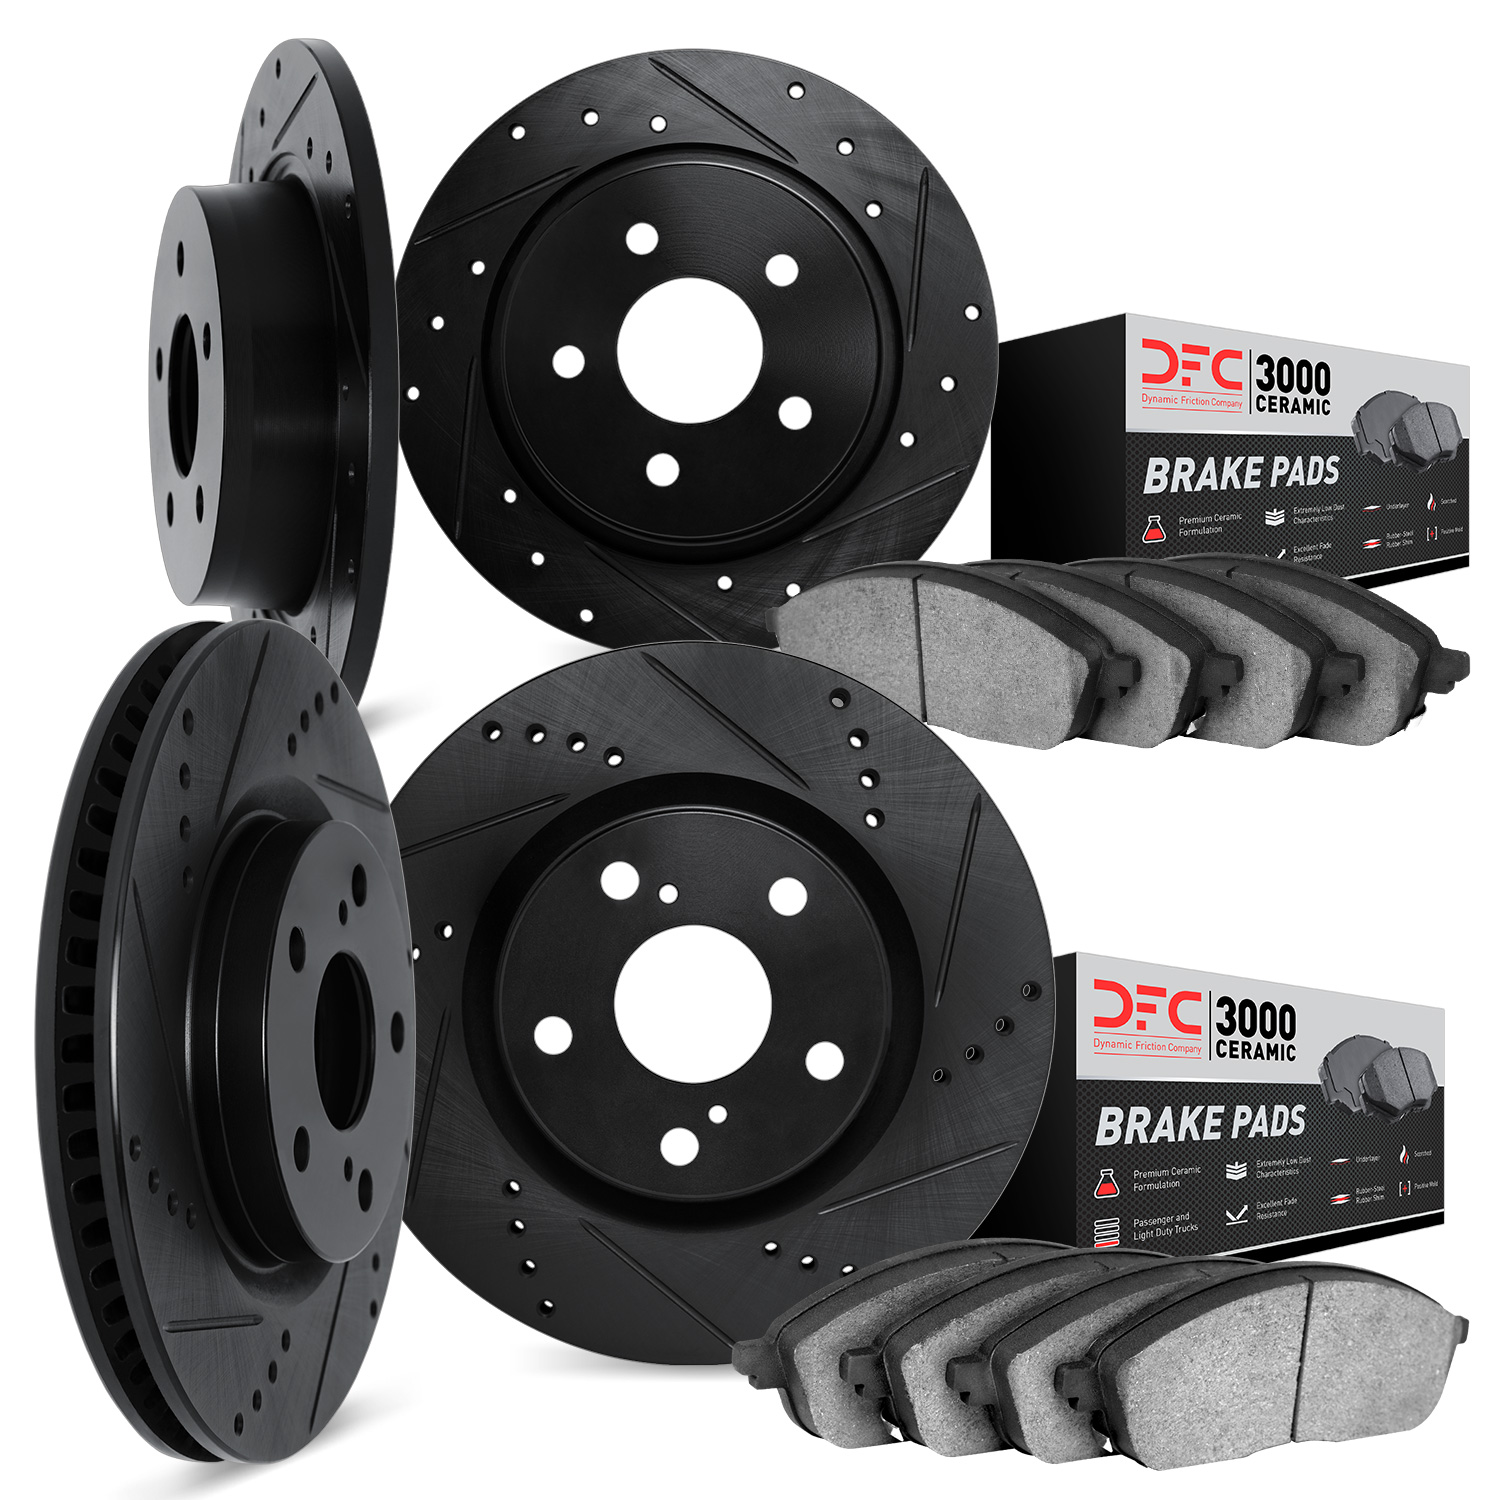 8304-59081 Drilled/Slotted Brake Rotors with 3000-Series Ceramic Brake Pads Kit [Black], 2014-2020 Acura/Honda, Position: Front